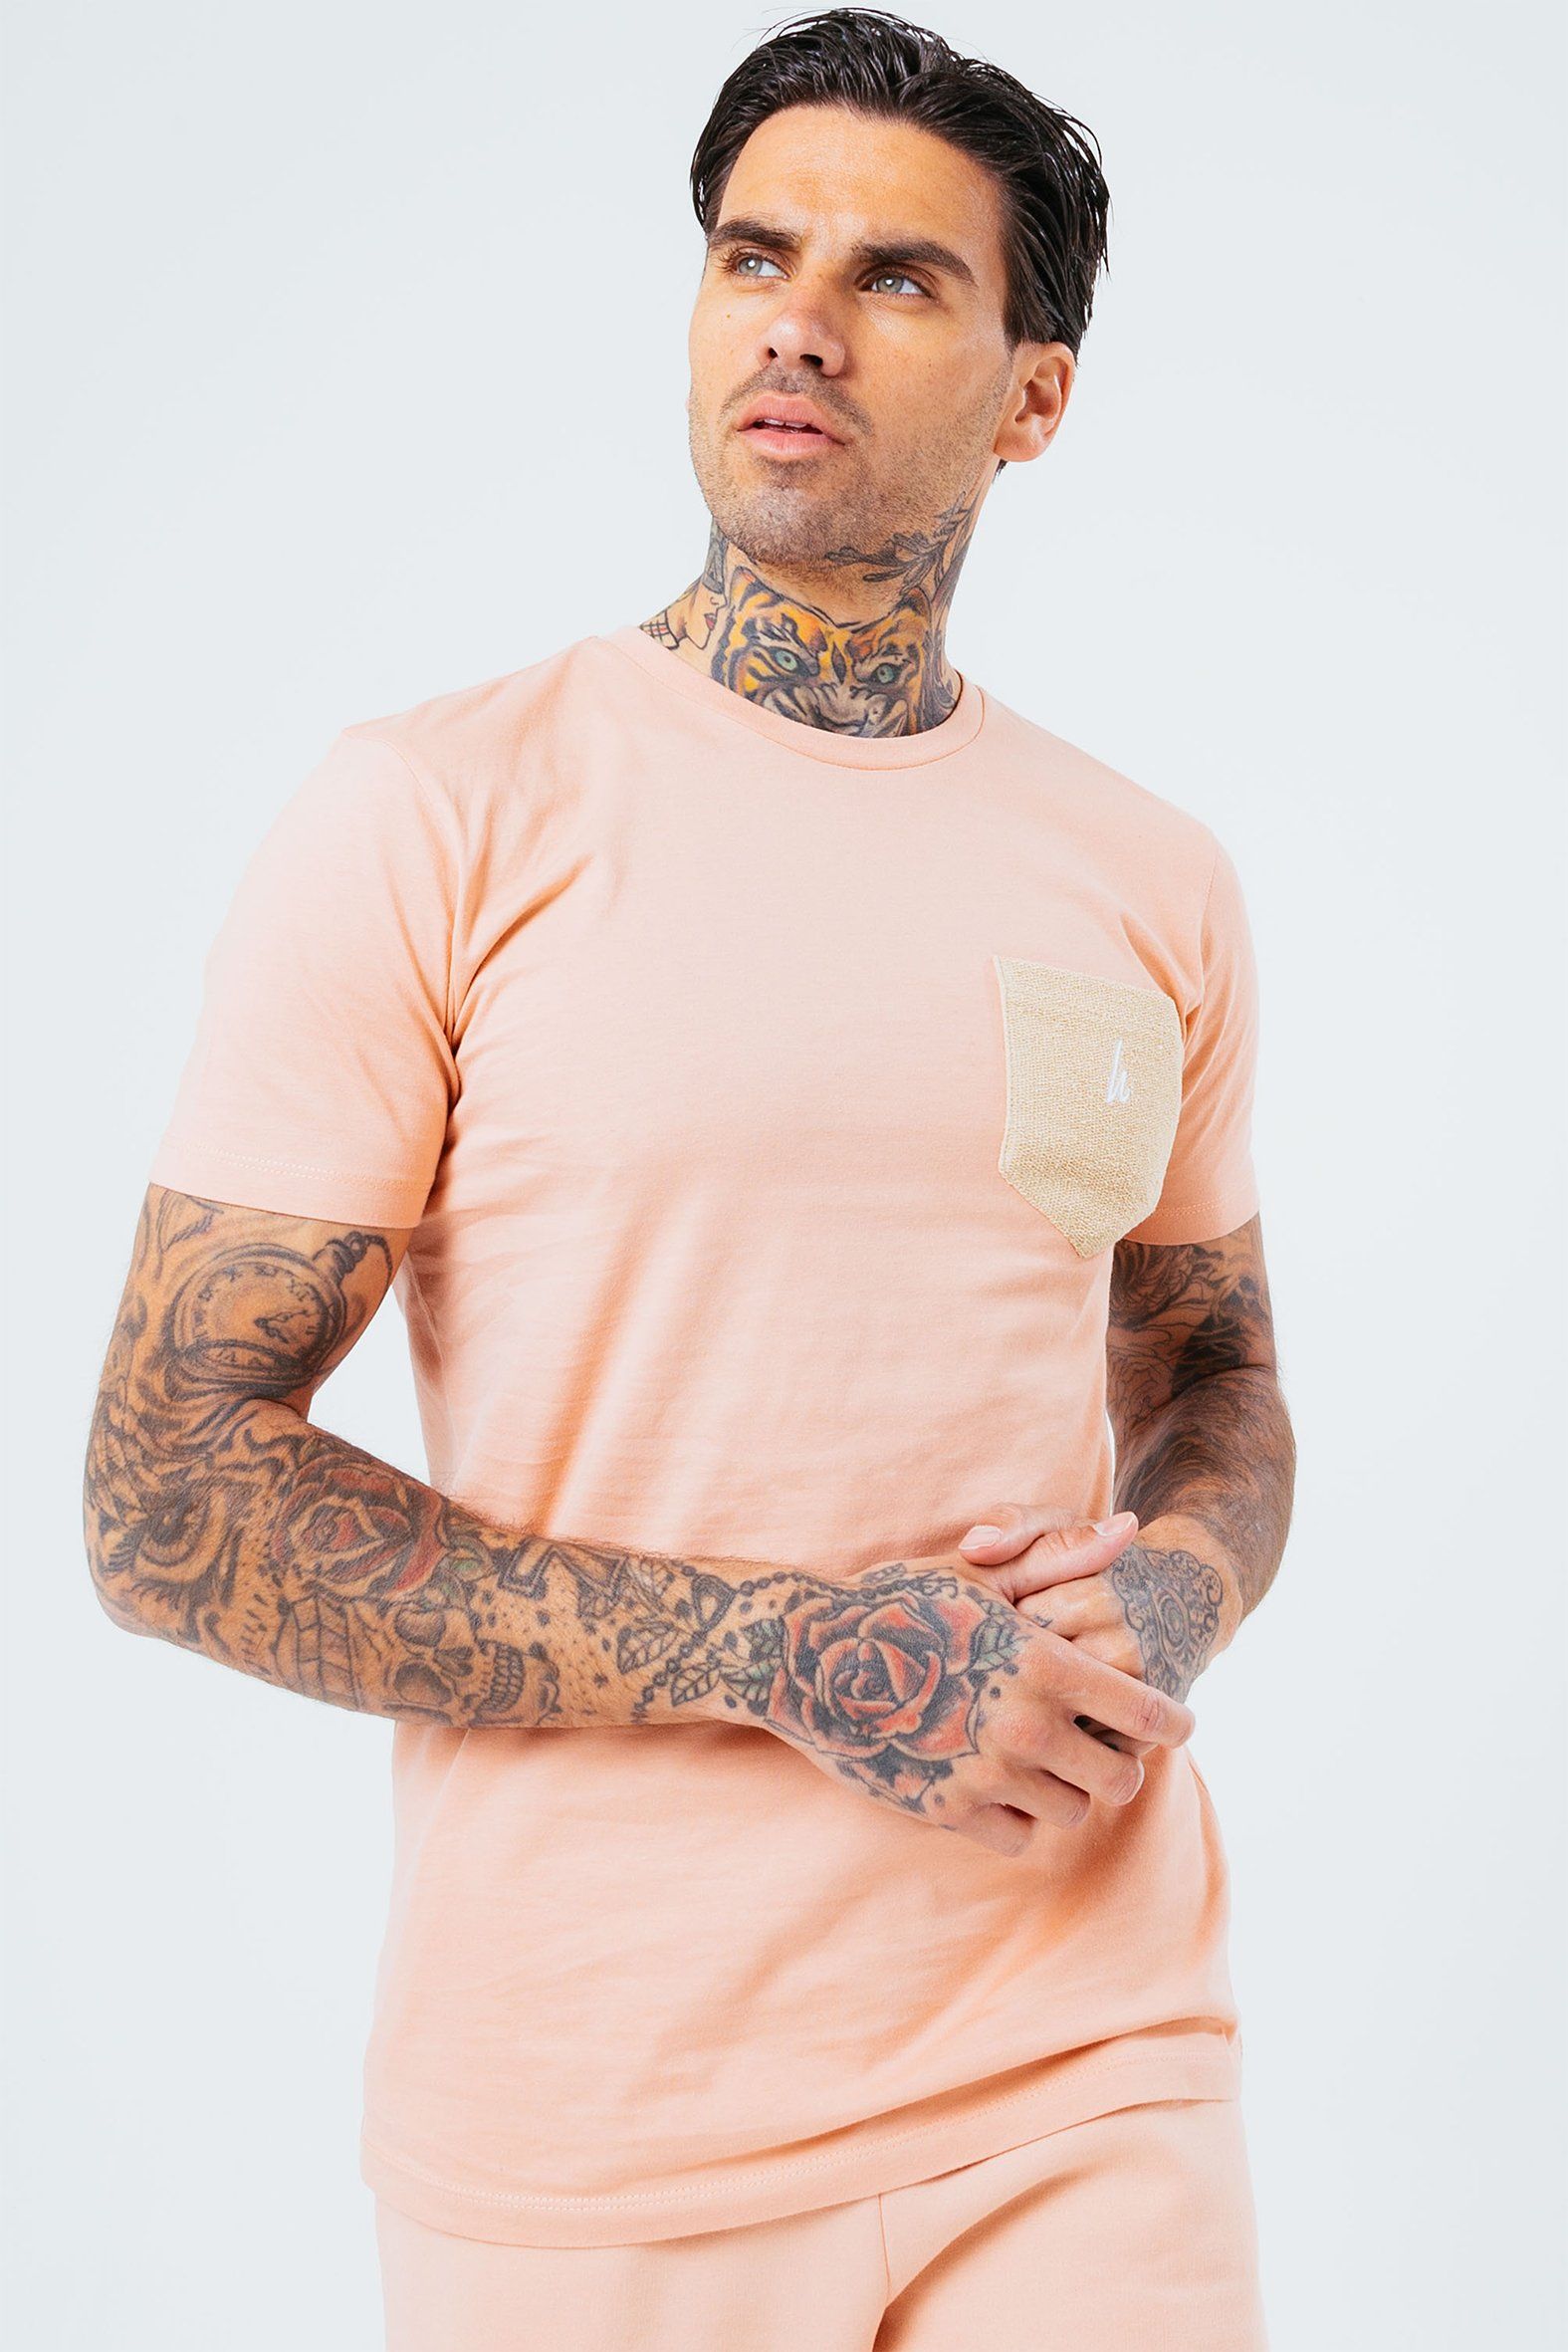 The HYPE. Pink Reverse Men's T-Shirt is your new go-to everyday essential. Designed in our standard men's tee shape, with a crew neckline and short sleeves for a classic fit. With a 100% cotton fabric base for supreme comfort and breathable space. With a minimalistic design approach, in a dusty pink colour palette. Finished with the new! just hype H logo embroidered on the front pocket in contrasting white. Wear with black skinny fit jeans for a smart casual look. Machine washable.